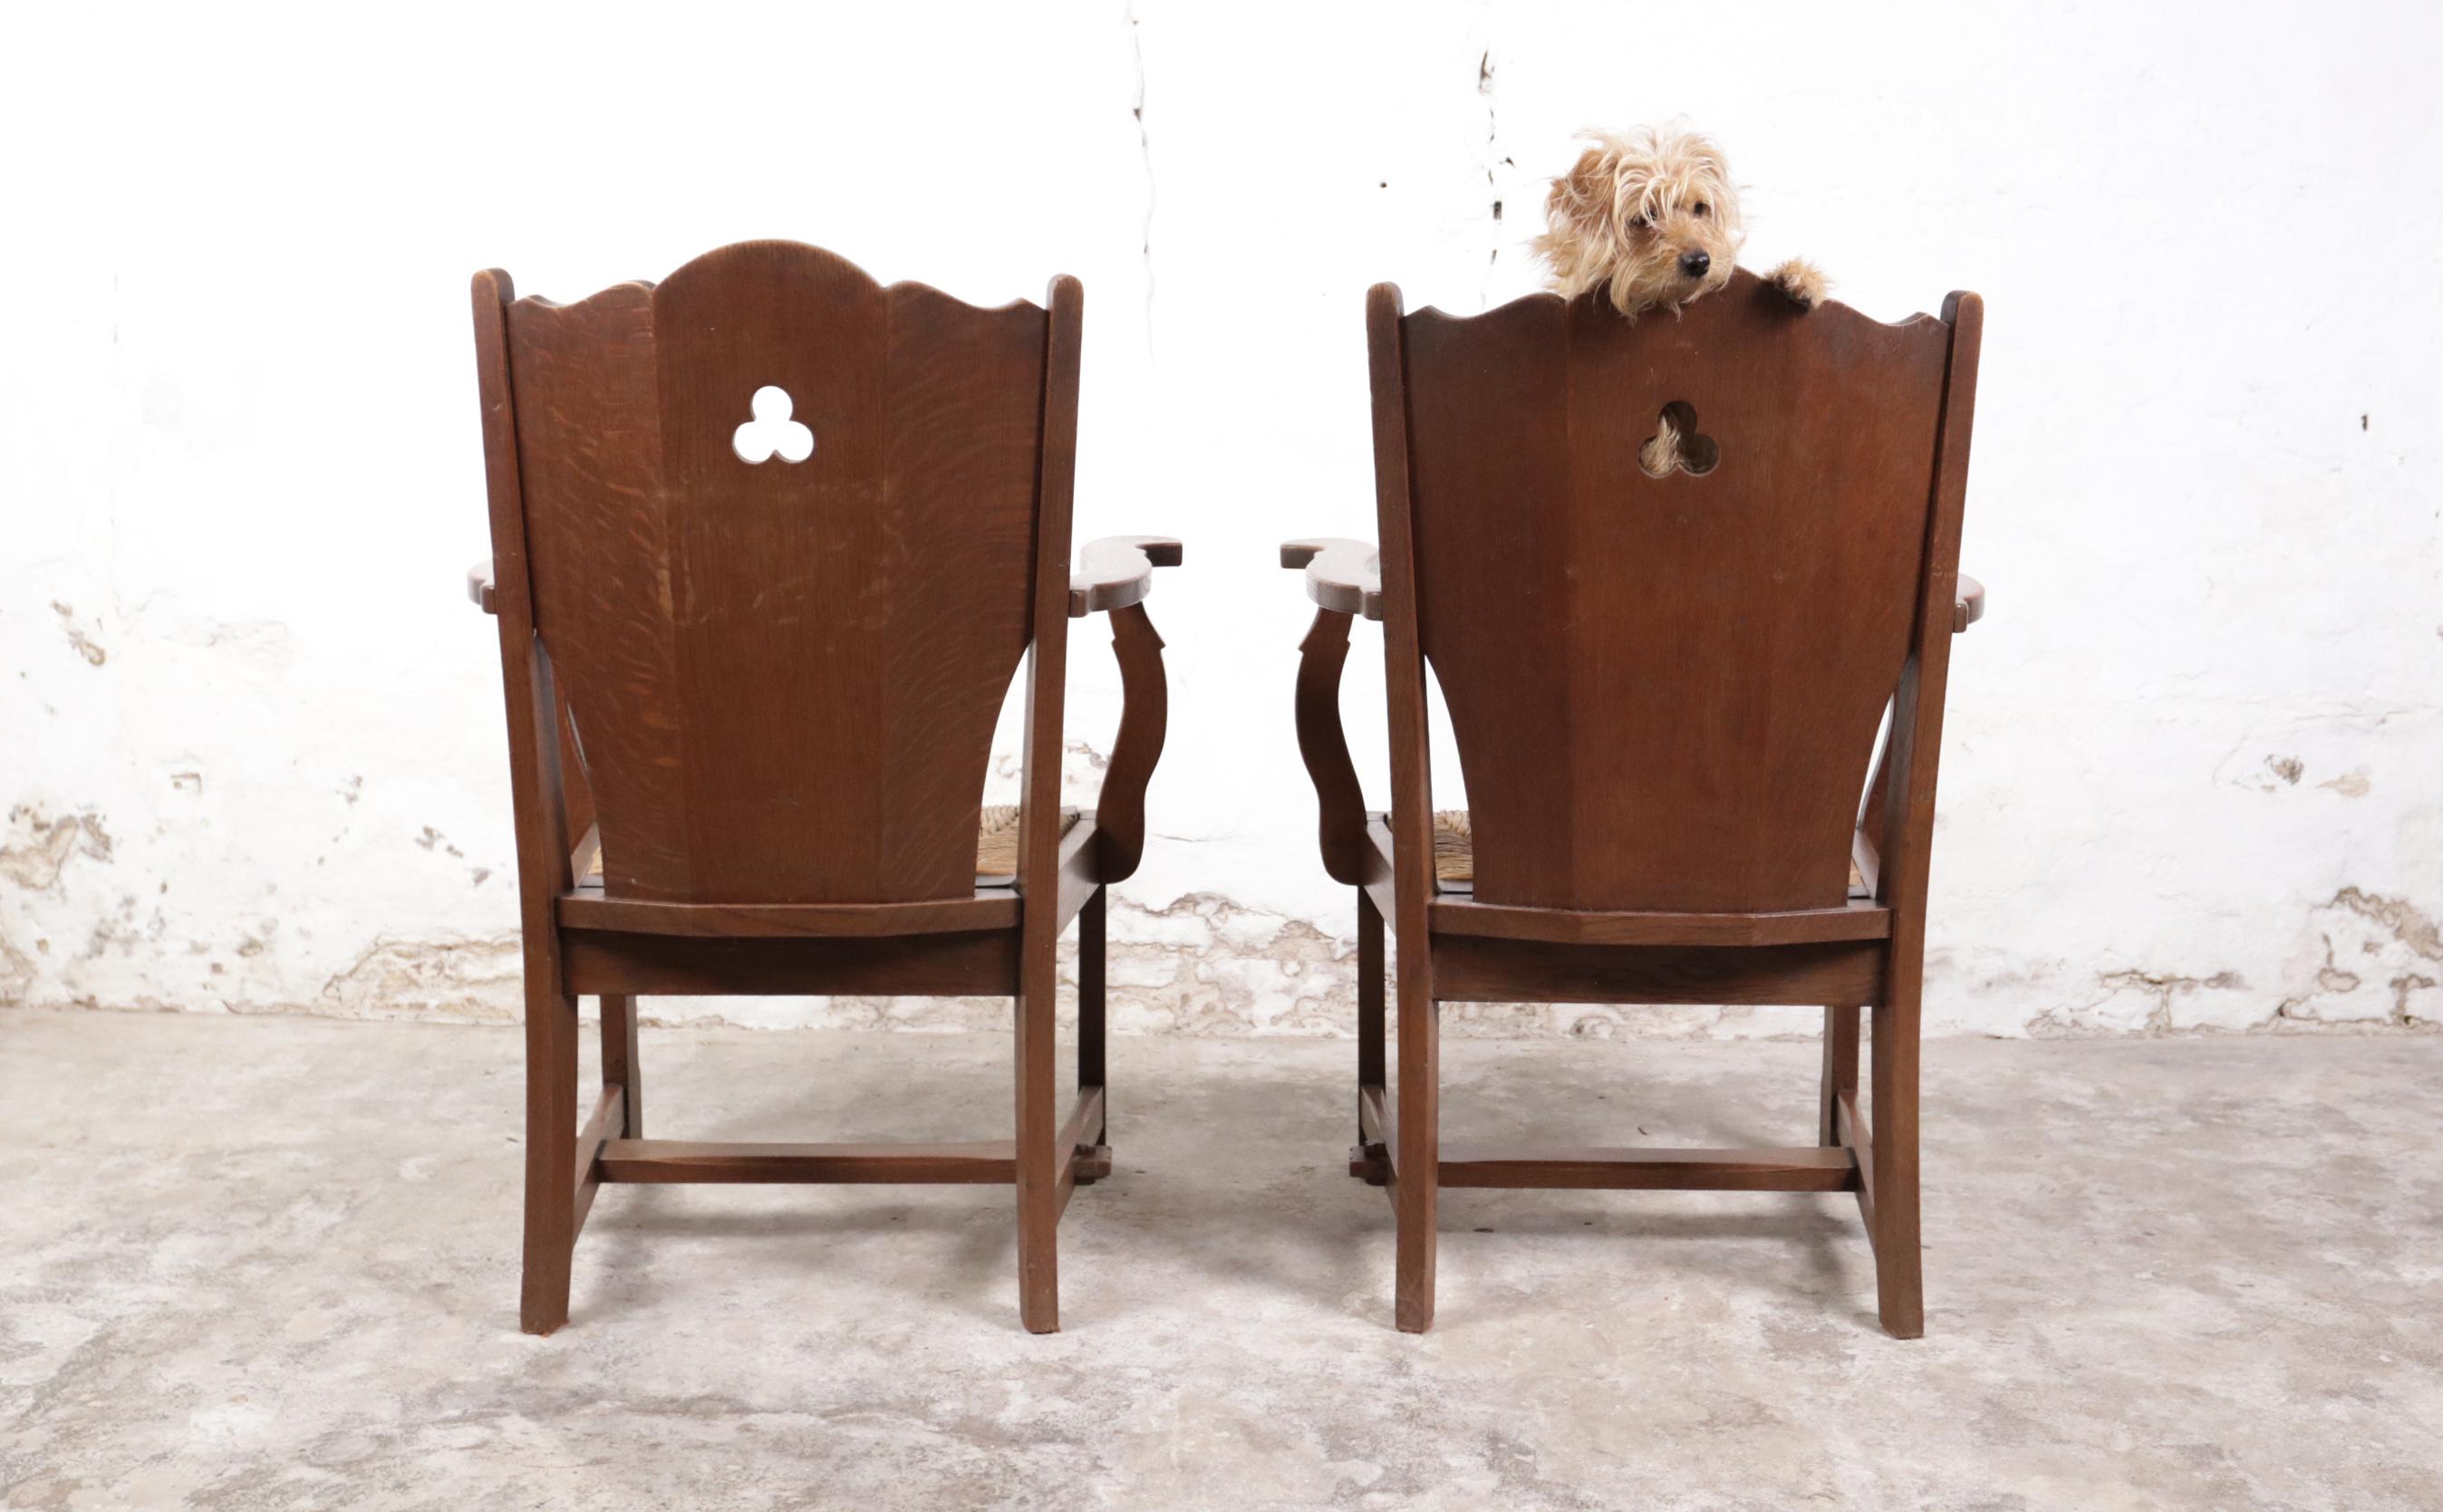 Set of 2 Story Book Dutch Brutalist Wabi Sabi Oak Rush Lounge Chairs ca. 1935 In Good Condition For Sale In Boven Leeuwen, NL